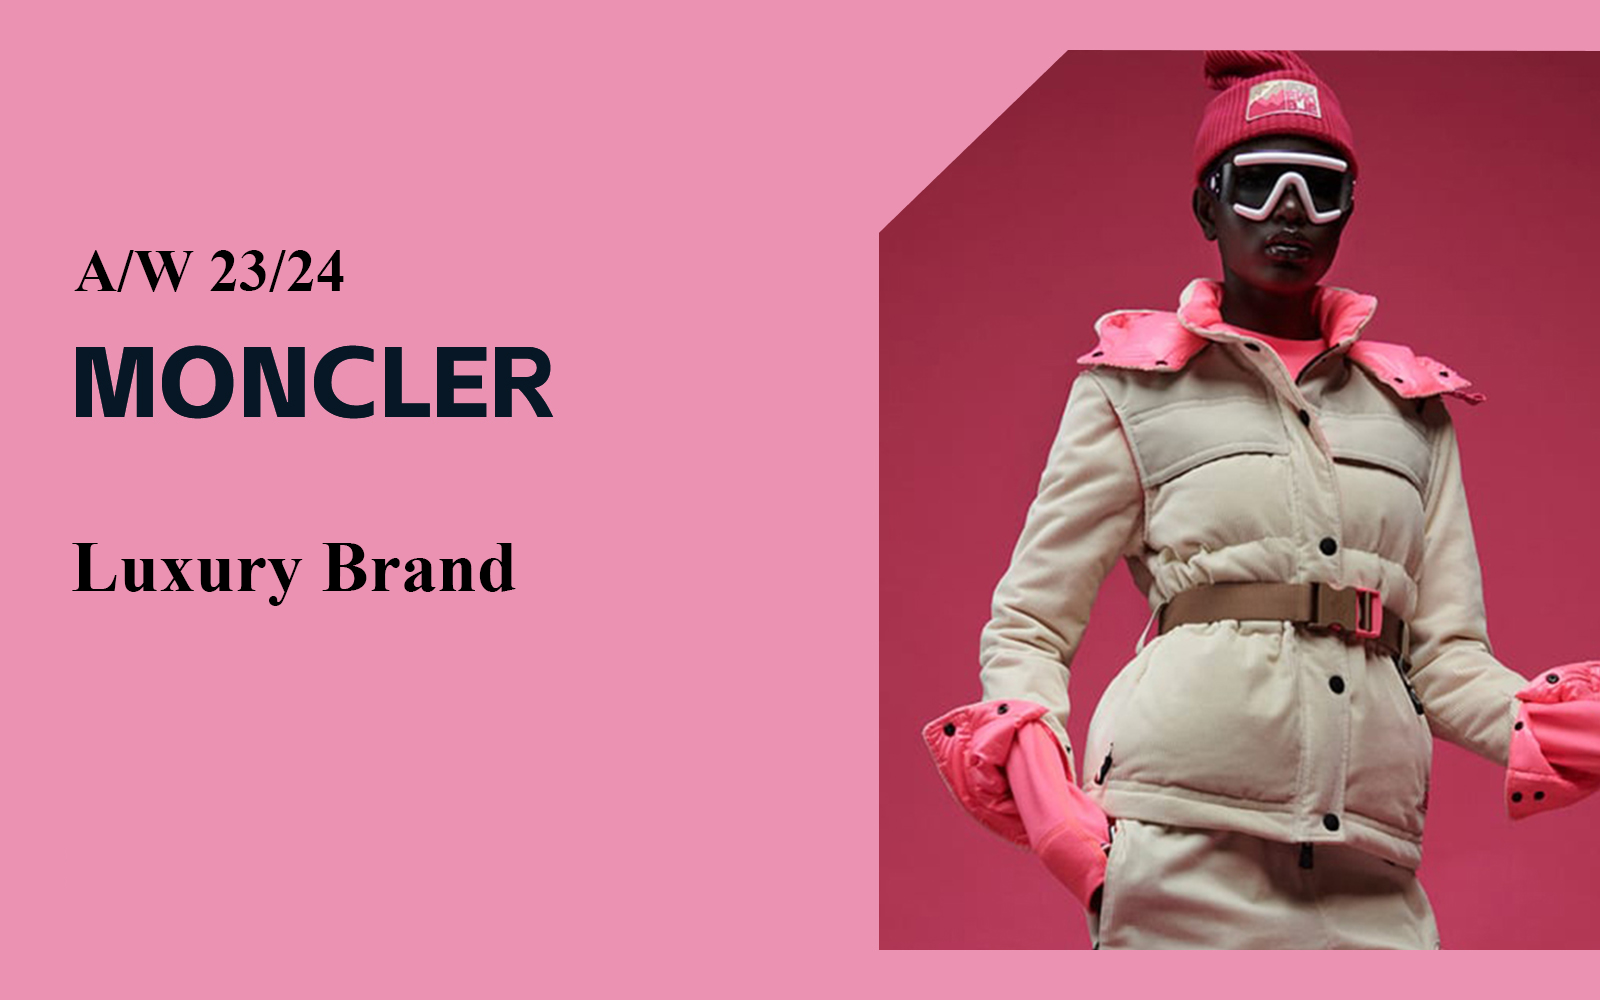 Outdoor Fashion -- The Analysis of Moncler The Luxury Brand